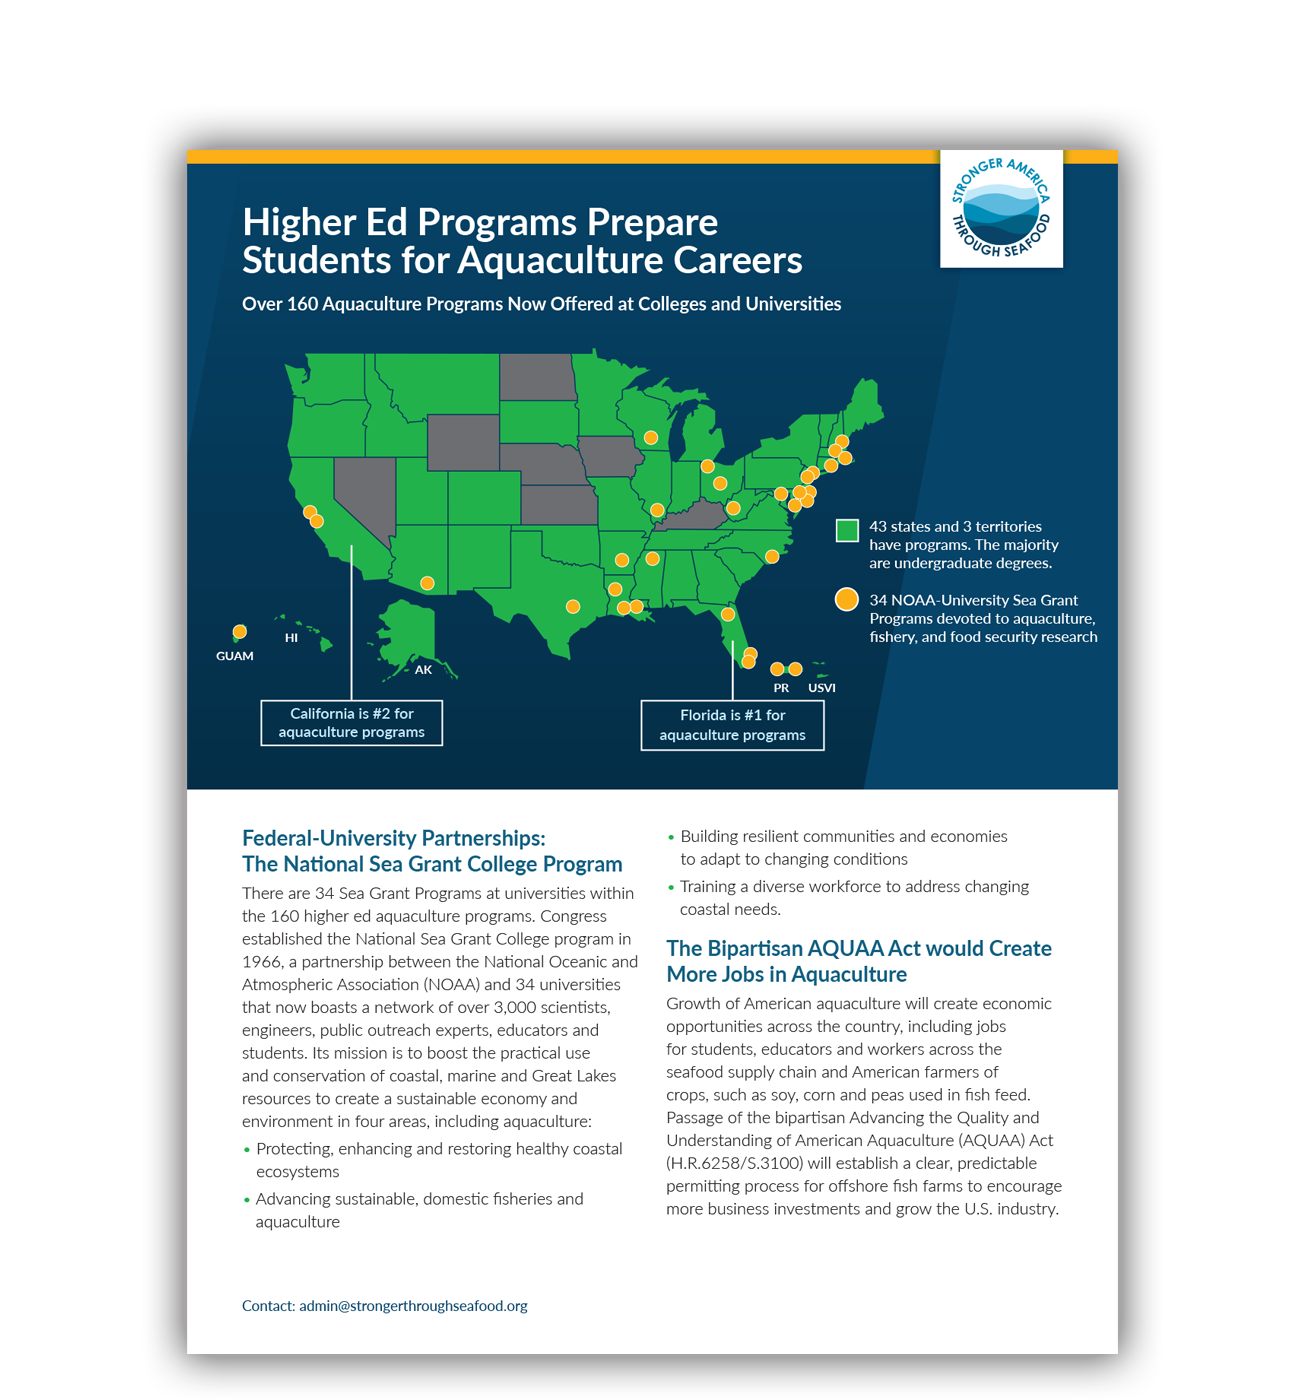 Higher Ed Programs for Aquaculture Careers